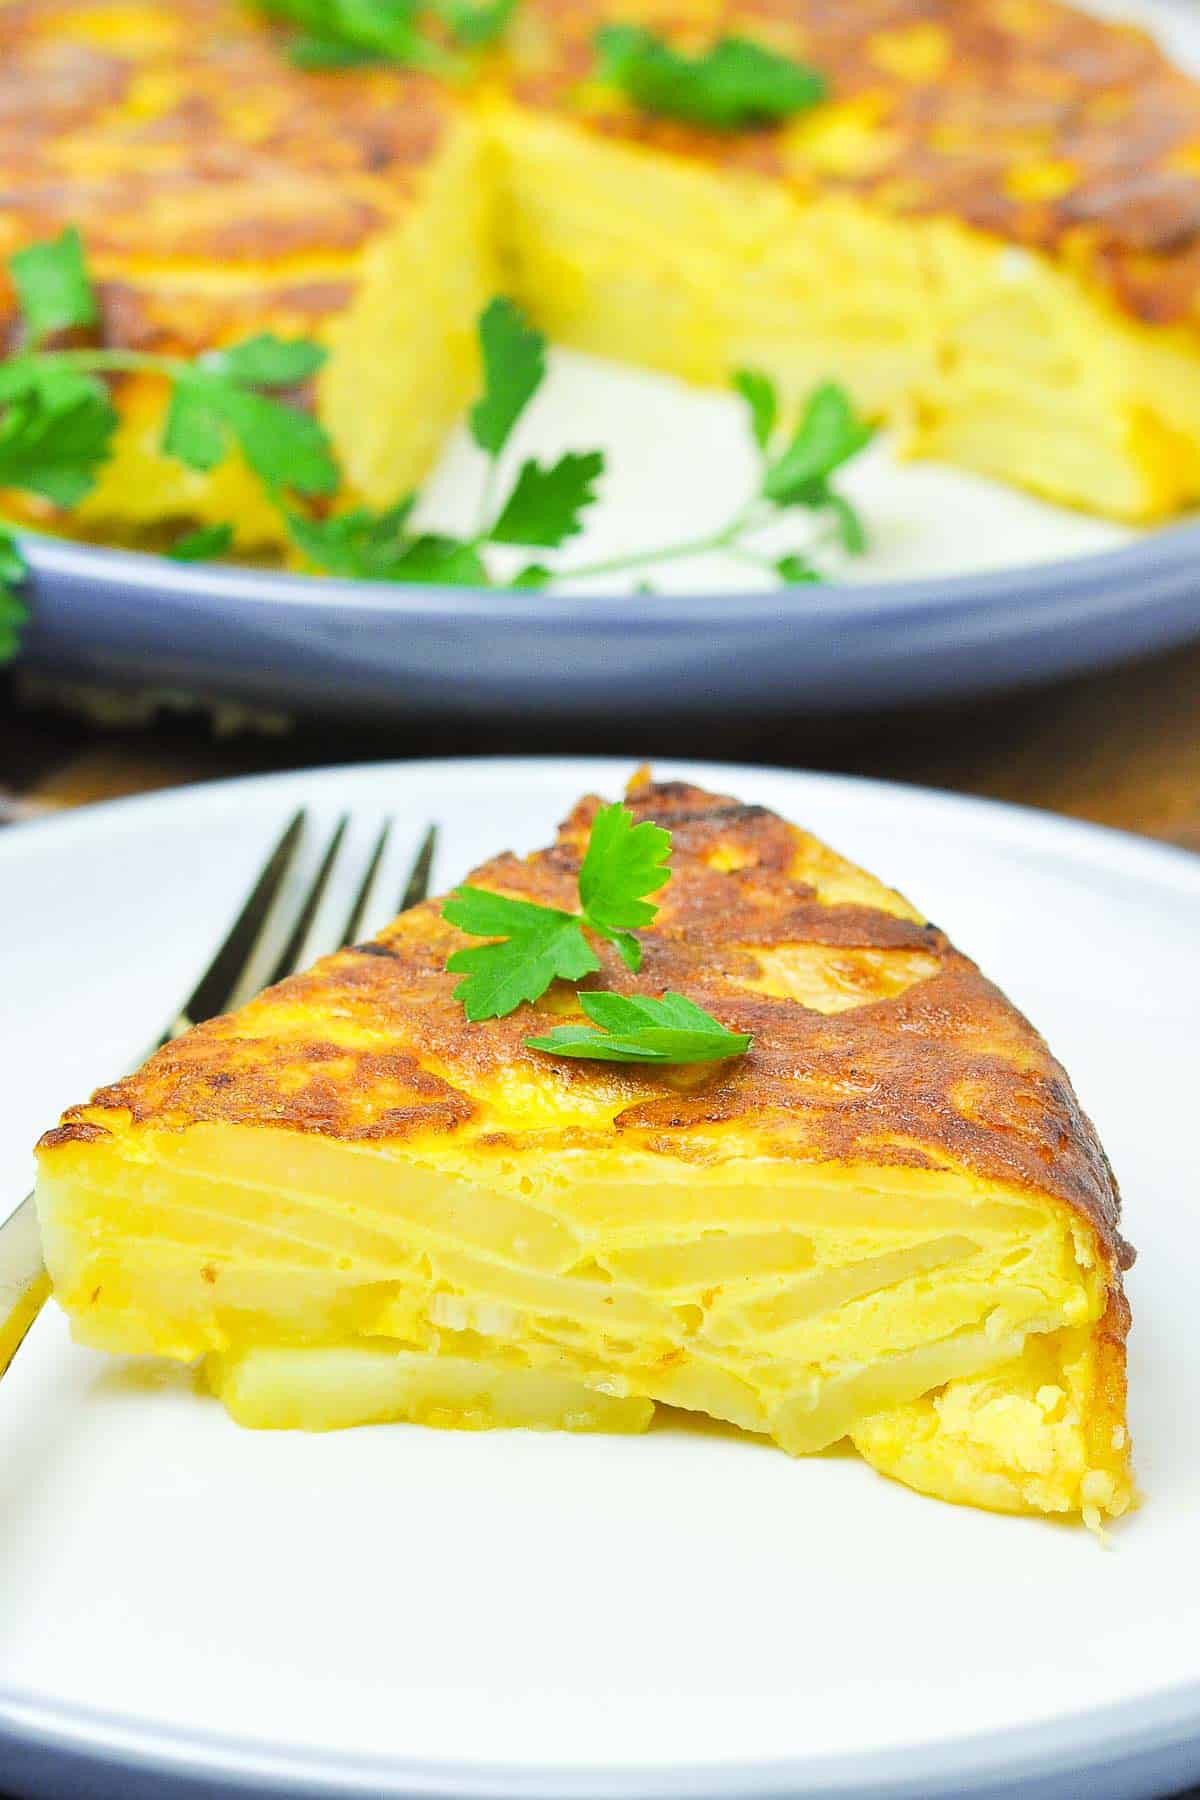 A slice of traditional Spanish tortilla or Tortilla Española on a plate with a fork.